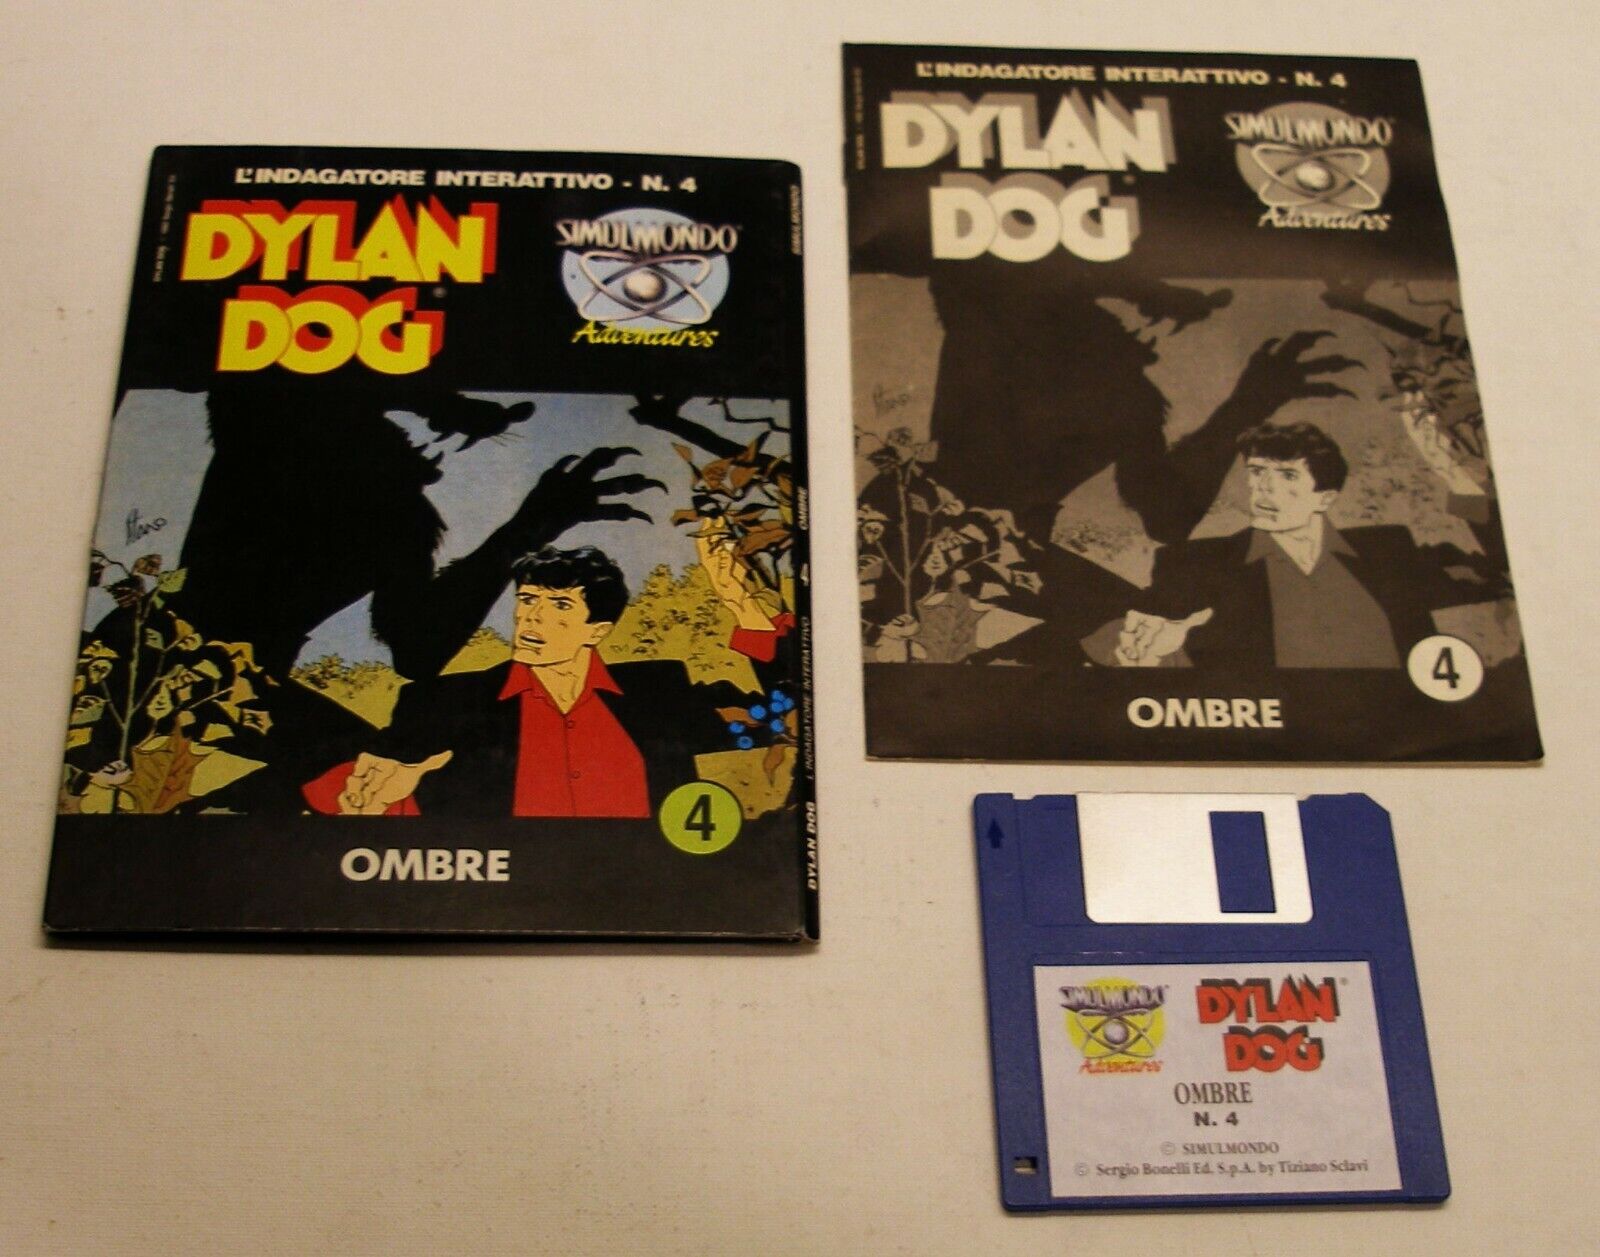 EXTREMELY RARE: Dylan Dog #04: Ombre by Simulmondo for Commodore Amiga